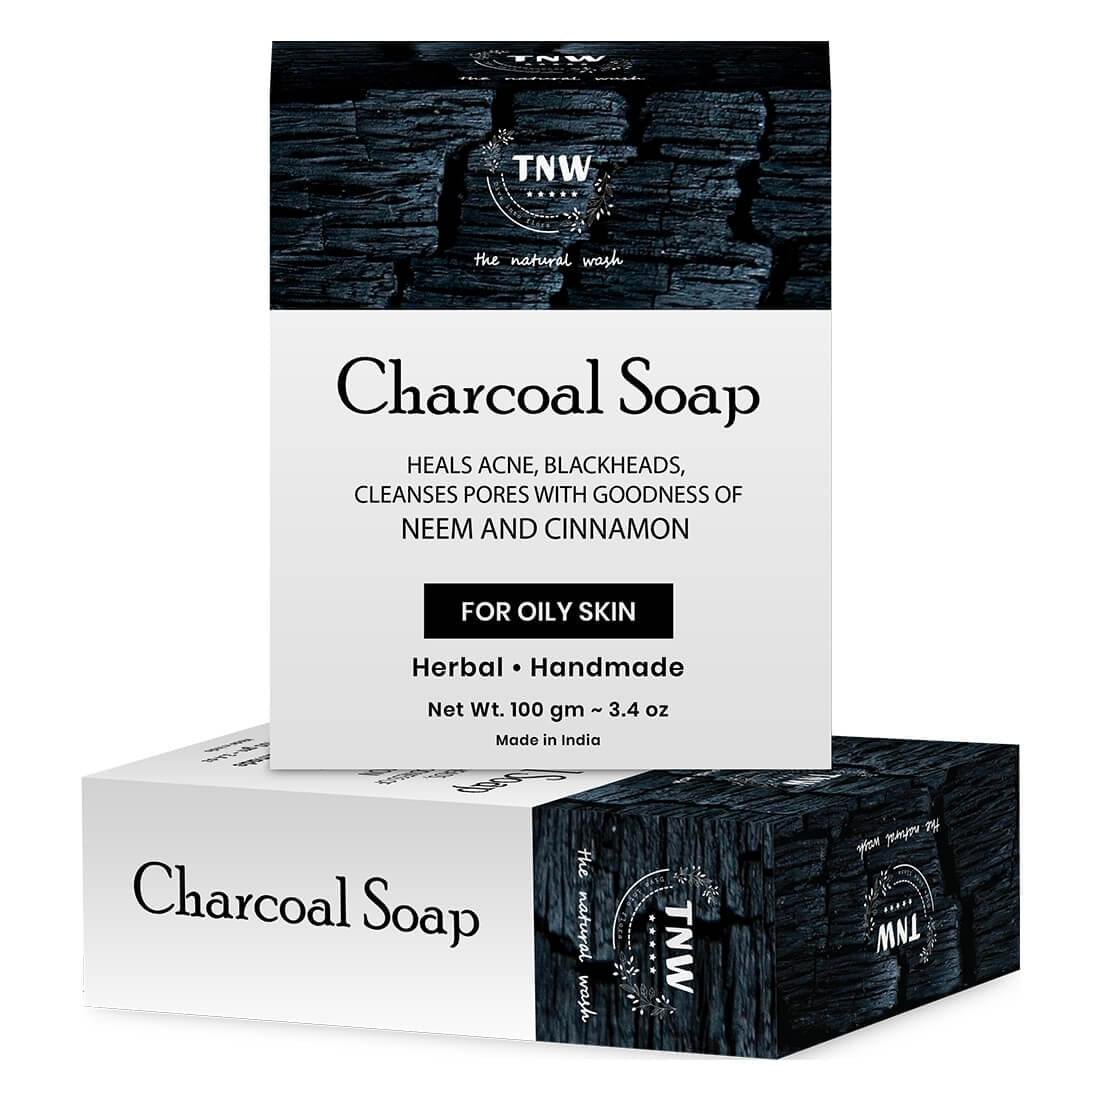 Charcoal Soap - Handmade Soap For Face & Body ( Paraben/ Sulphate/ Dye/ Silicon Free).